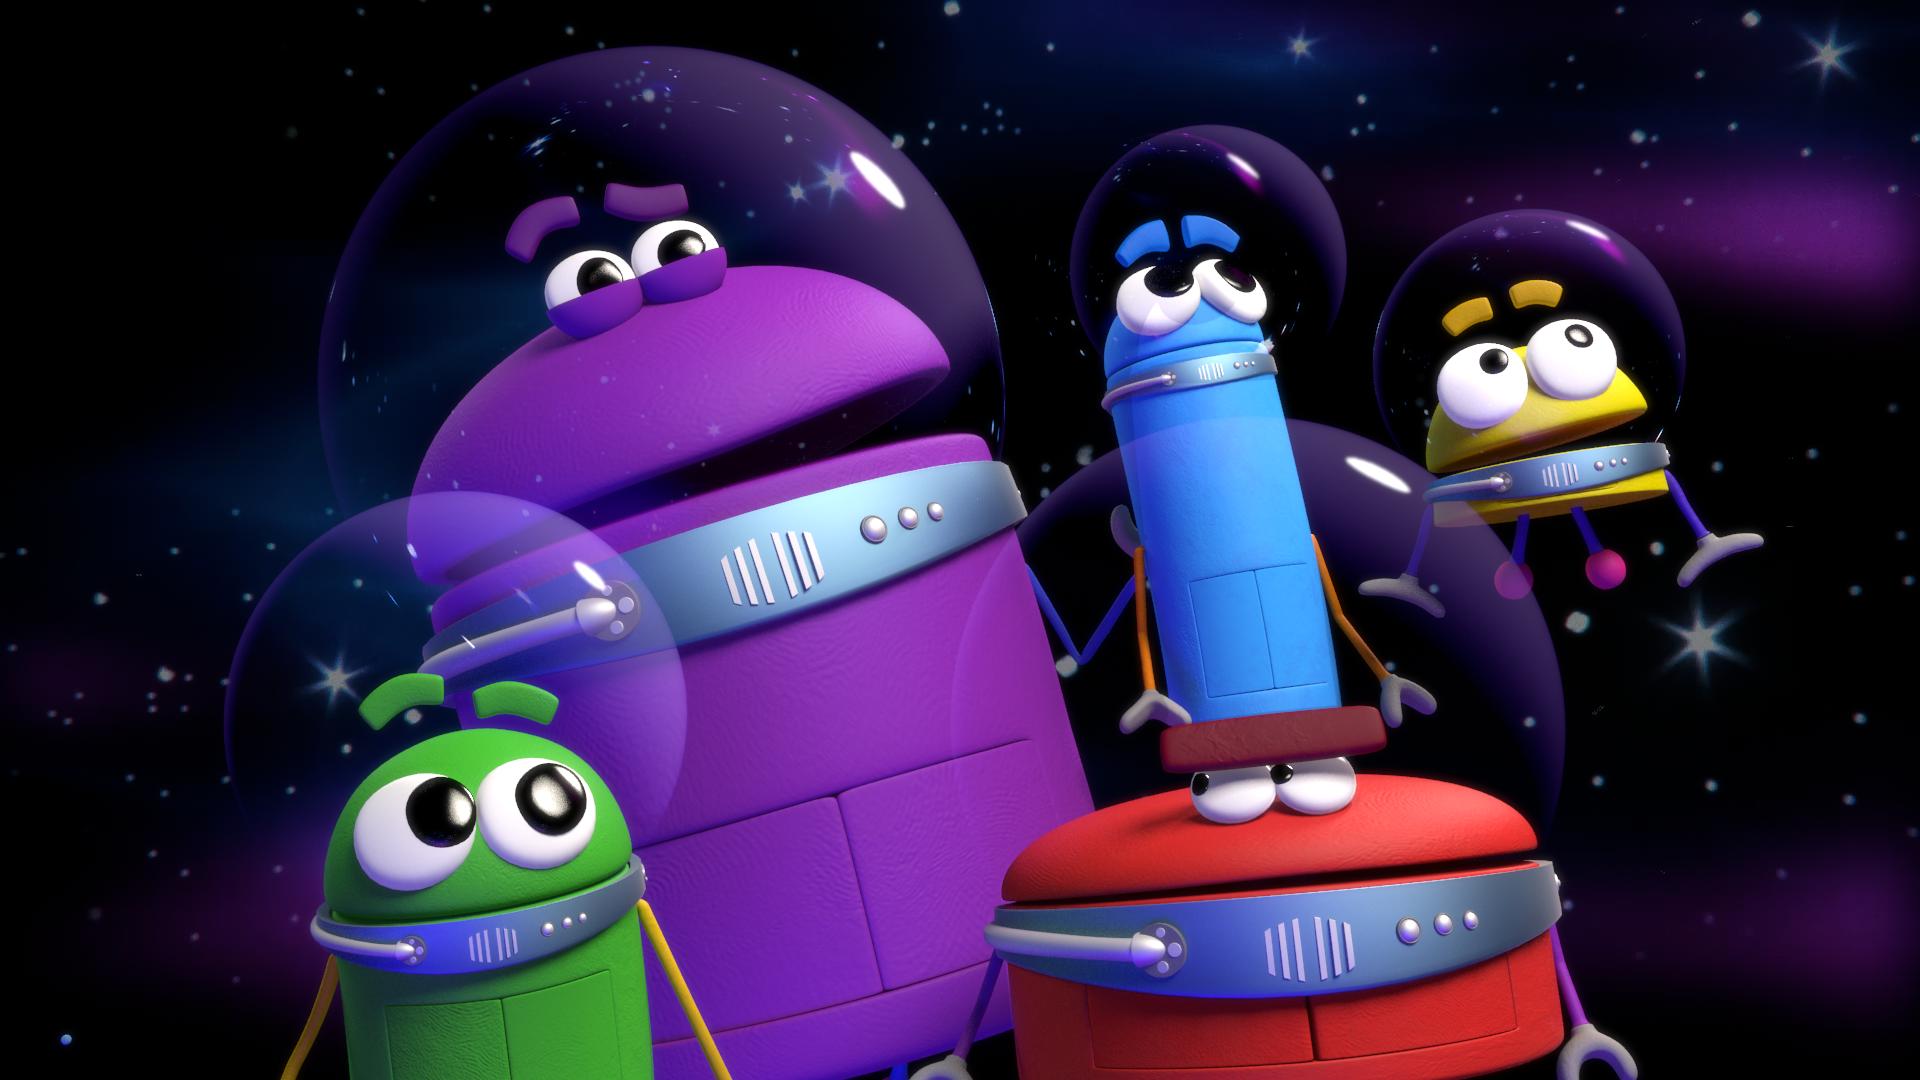 Ask the StoryBots Wallpaper and Details